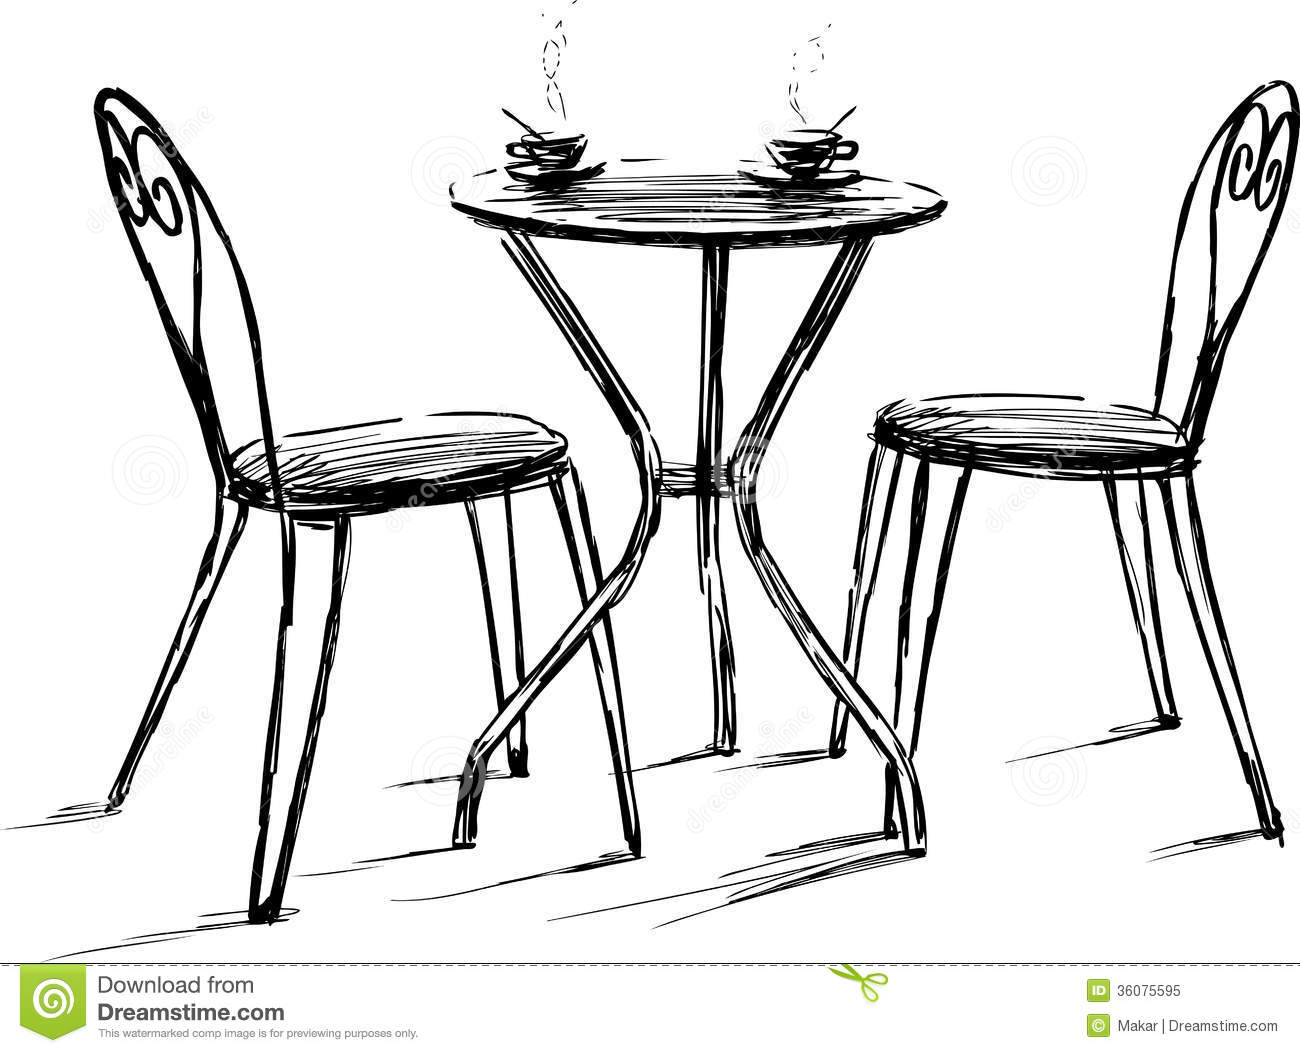 Furniture In Summer Cafe Royalty Free Stock Photo   Image  36075595